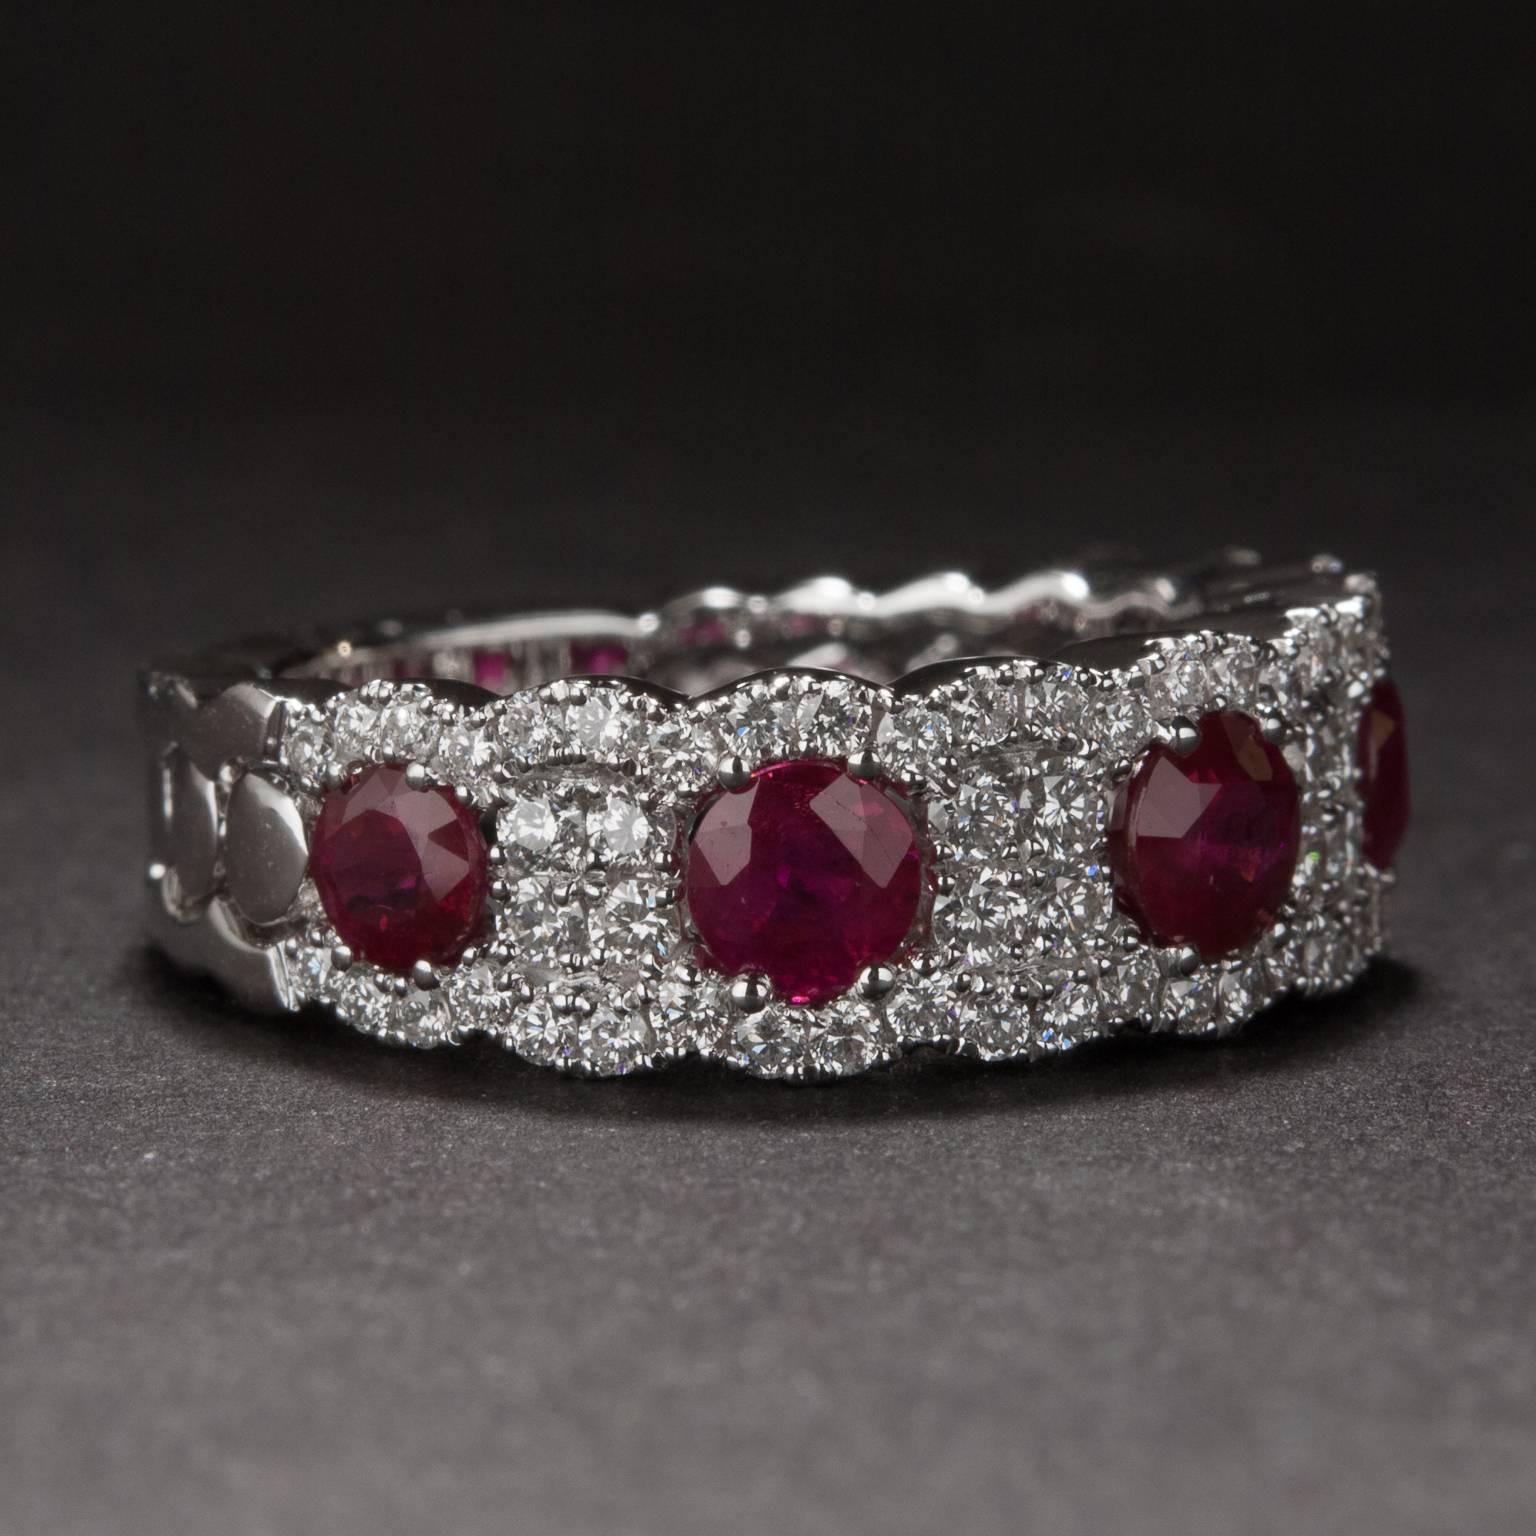 A lovely 7mm wide half-eternity band with .72 total carats of ruby and 1.56 total carats of diamond. The mounting is crafted in 14k white gold and is currently sized at 6.5.